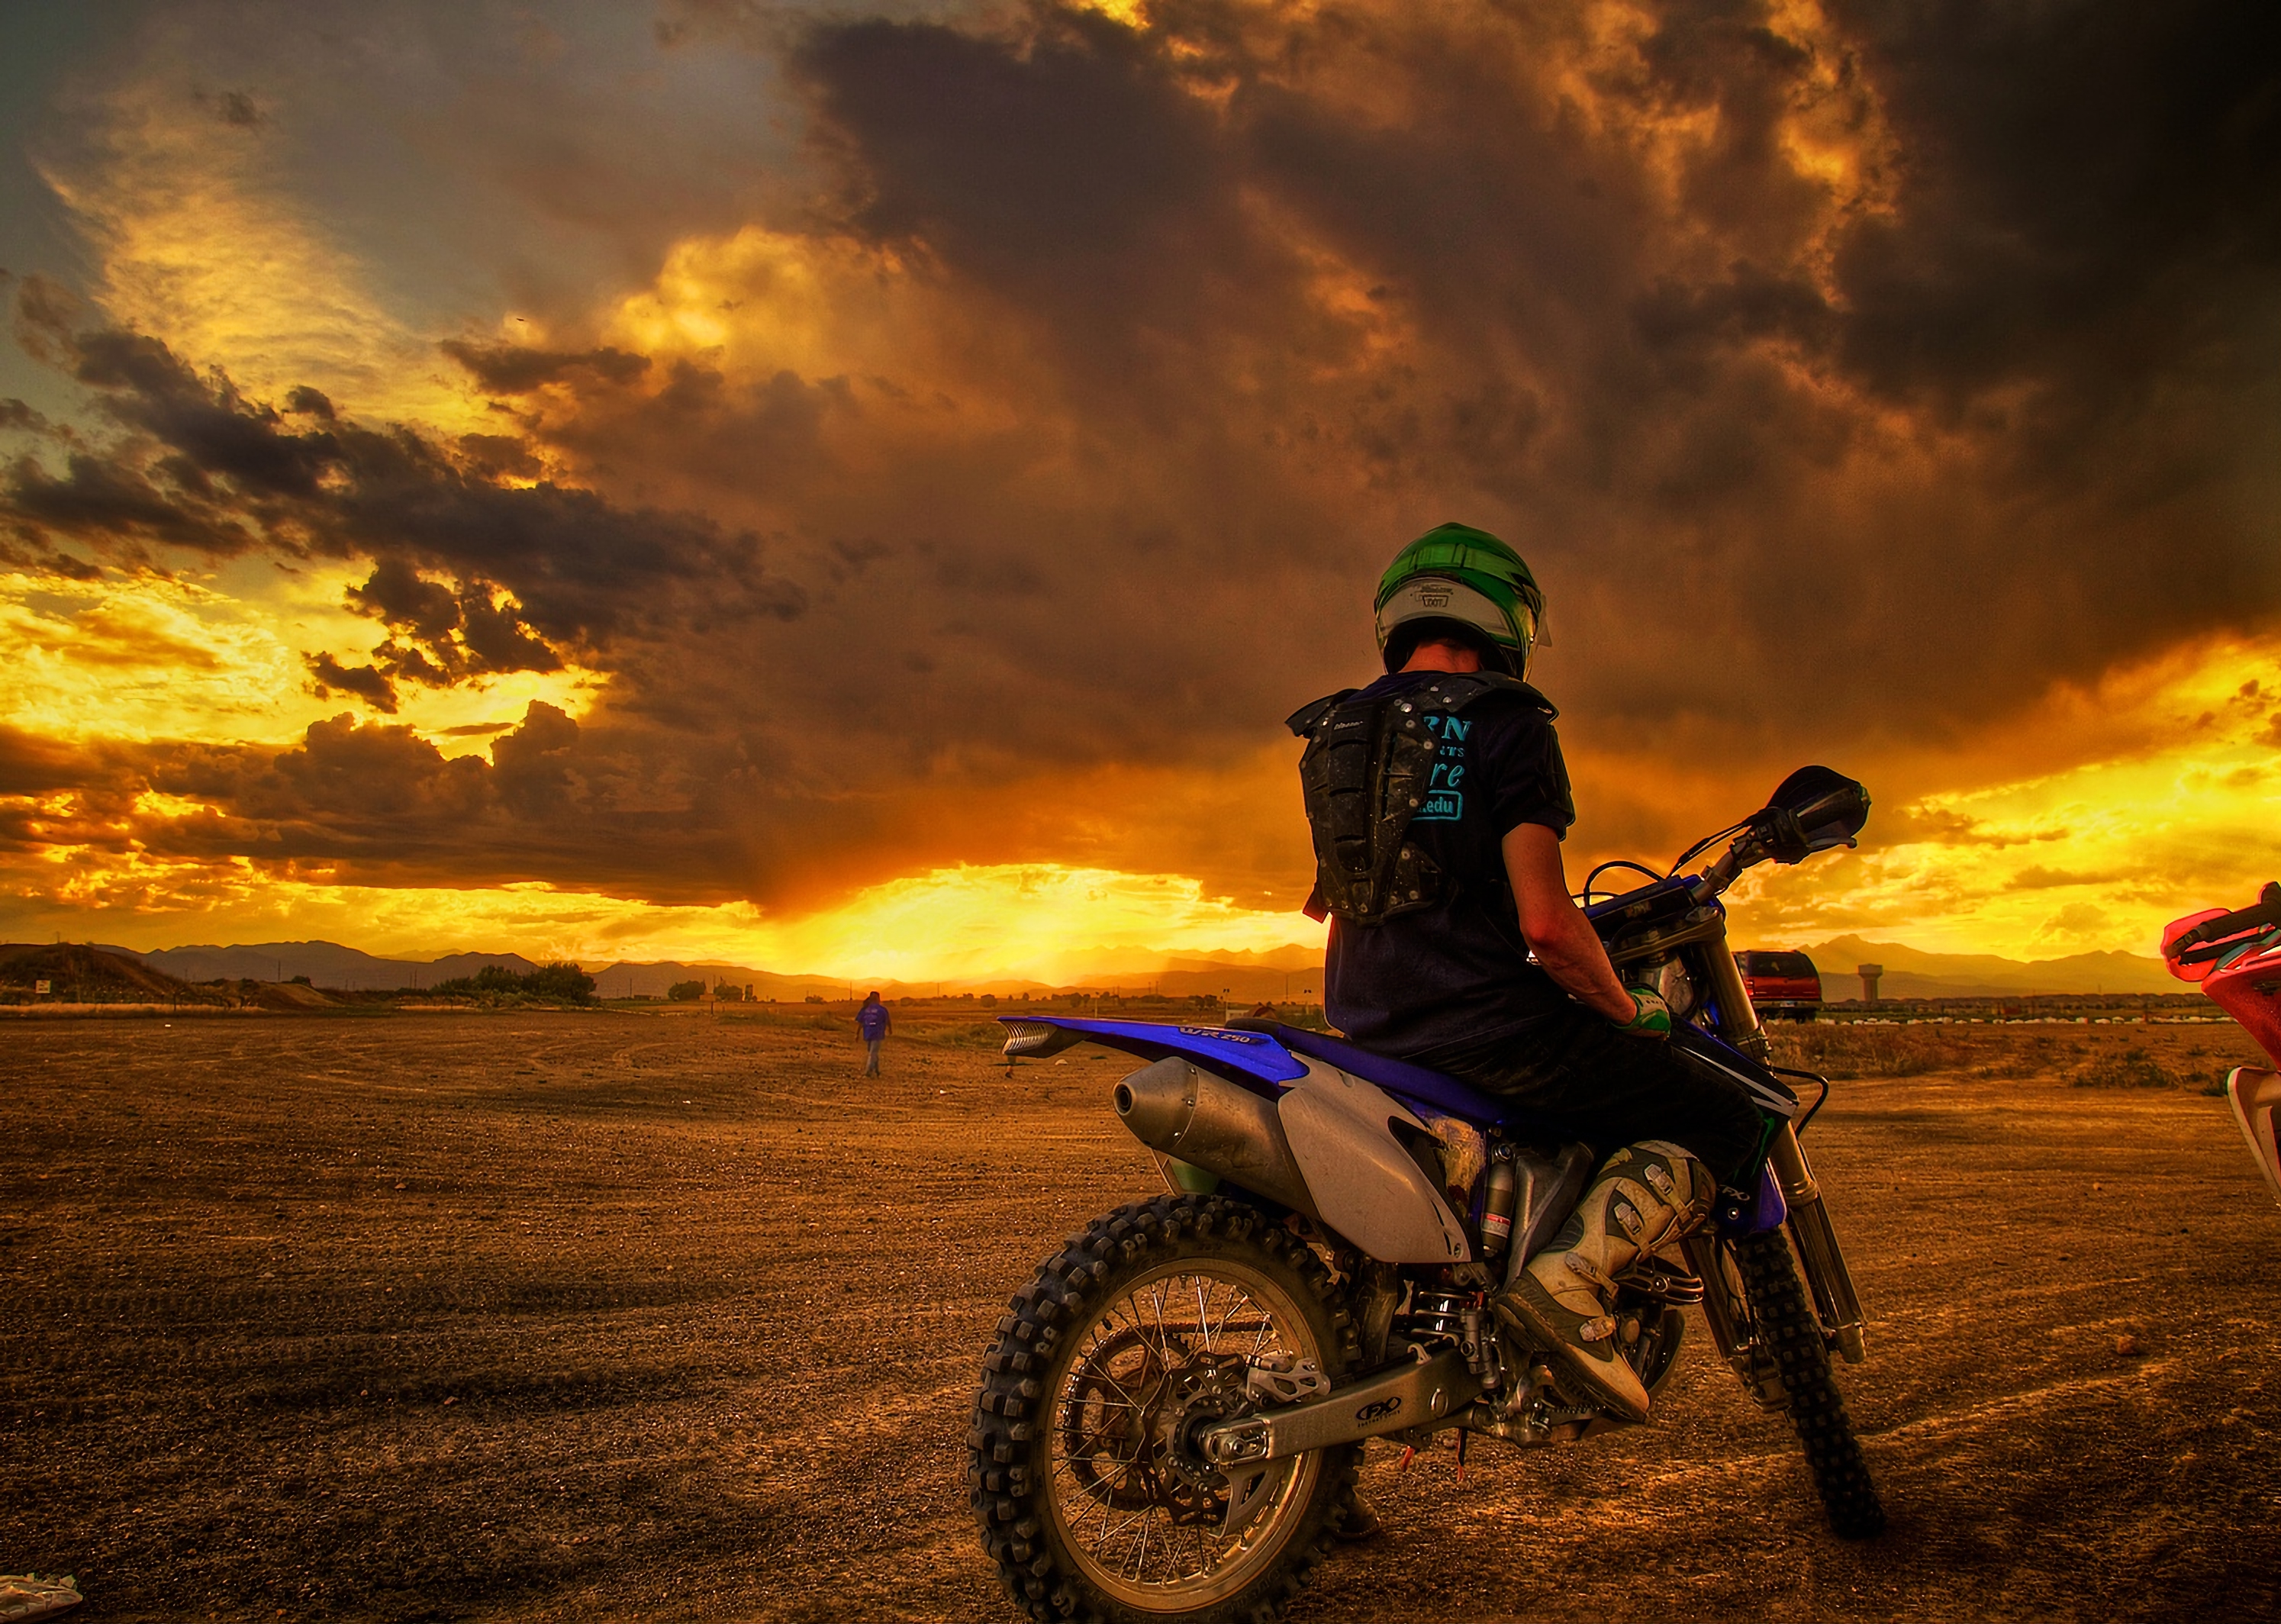 motorcycle, motorcyclist, motorcycles, sunset